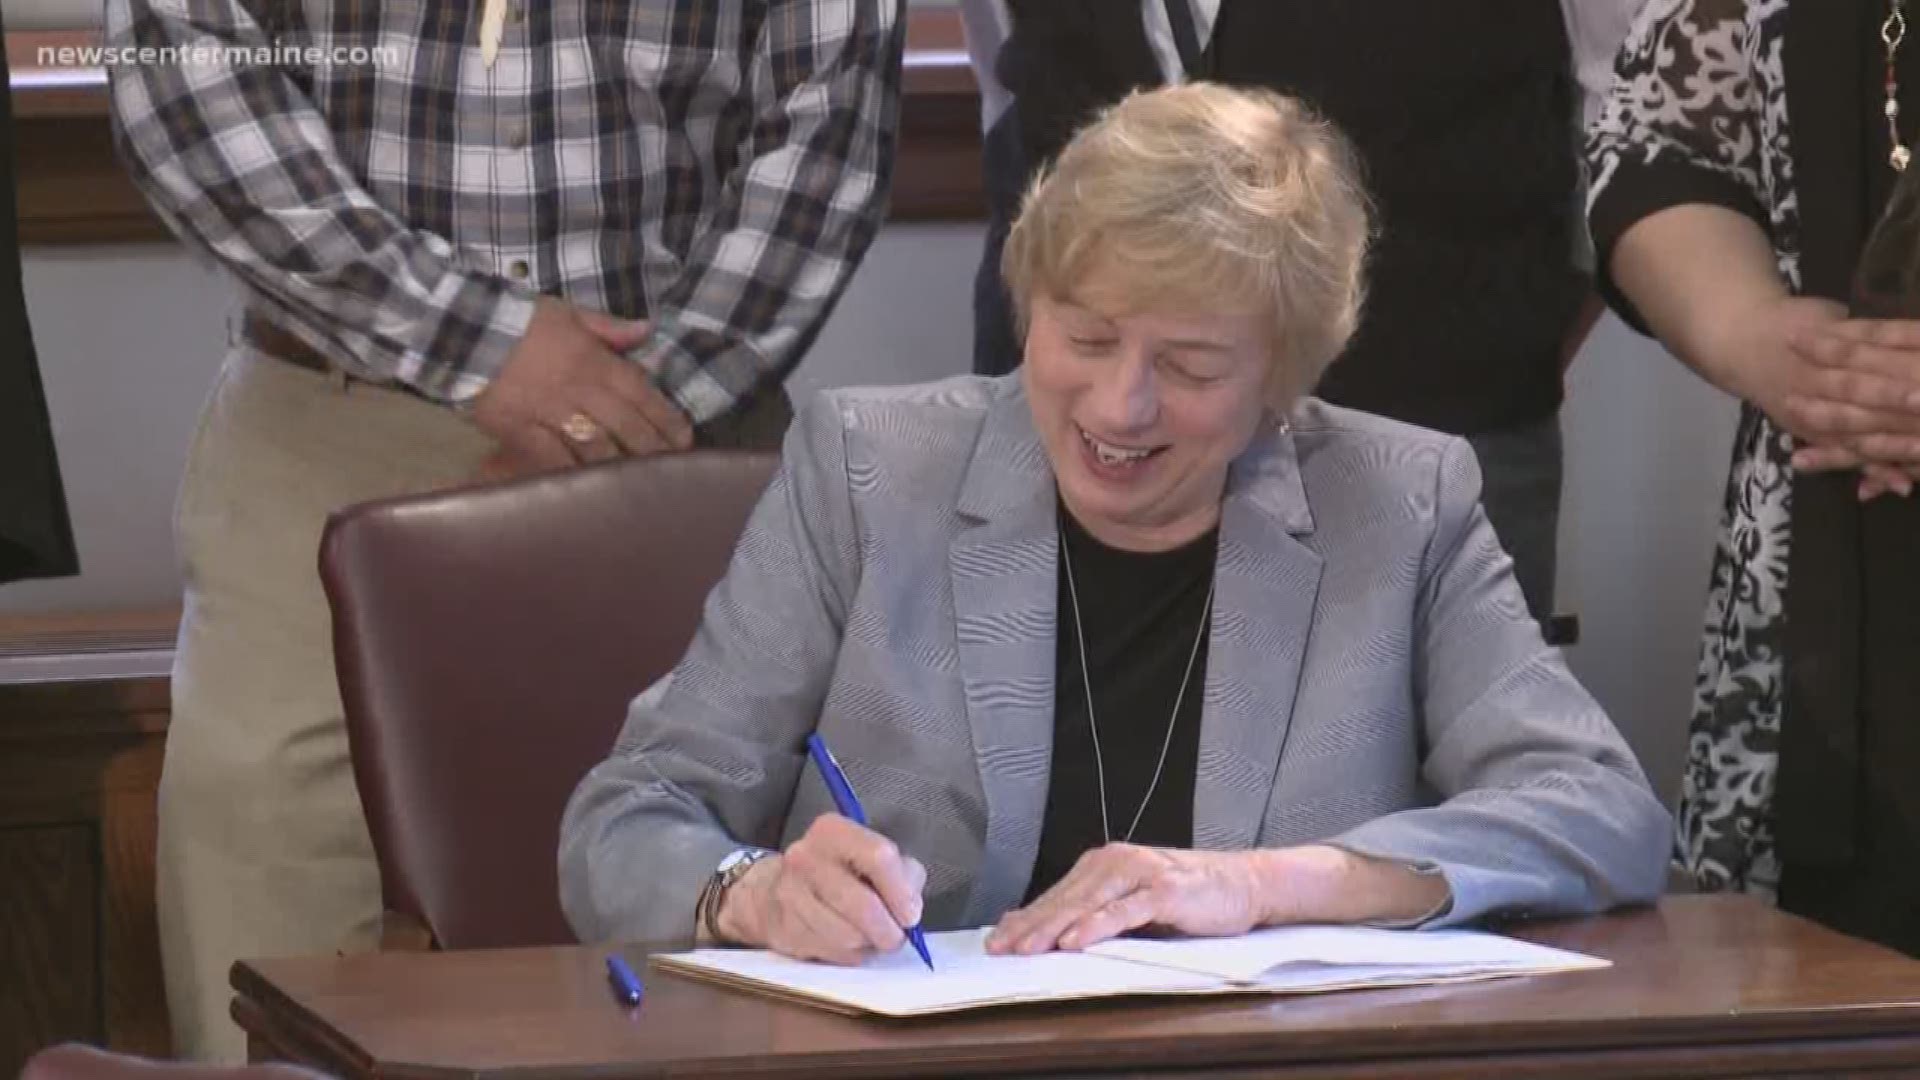 Gov. Janet Mills signed a bill on Friday to change 'Columbus Day' to 'Indigenous People's Day' in Maine.